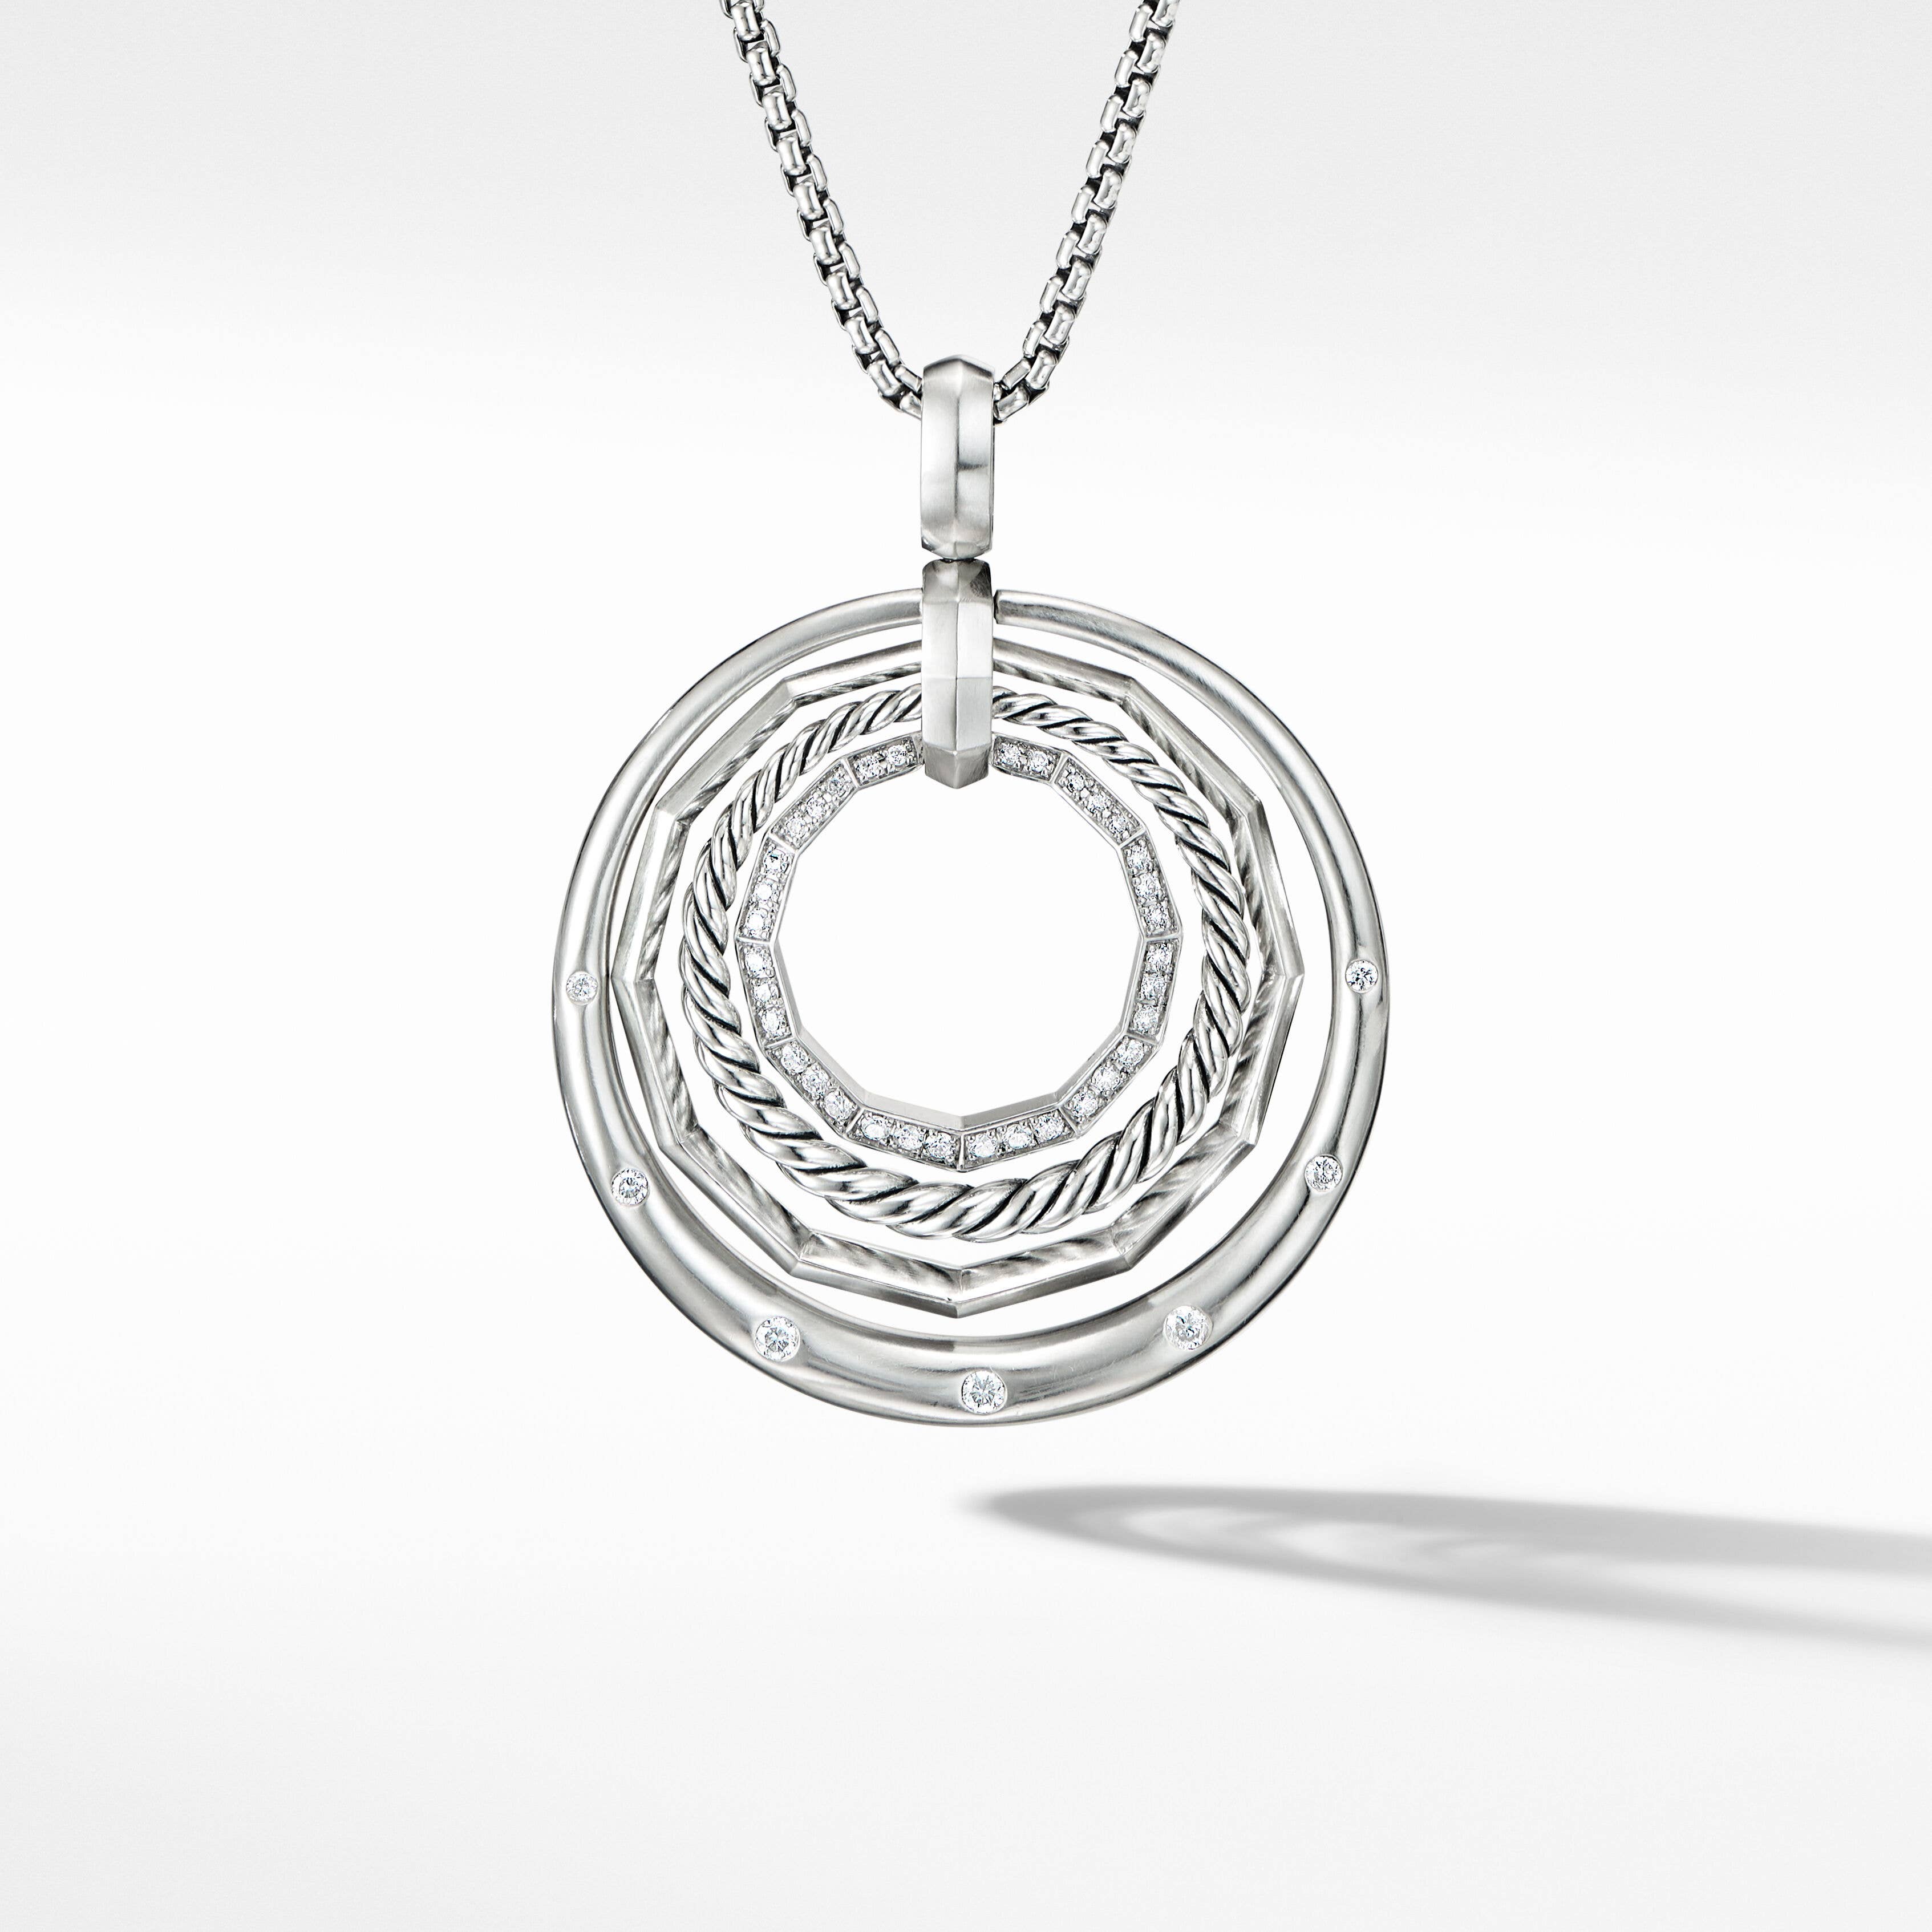 Stax Pendant Necklace in Sterling Silver with Pavé Diamonds